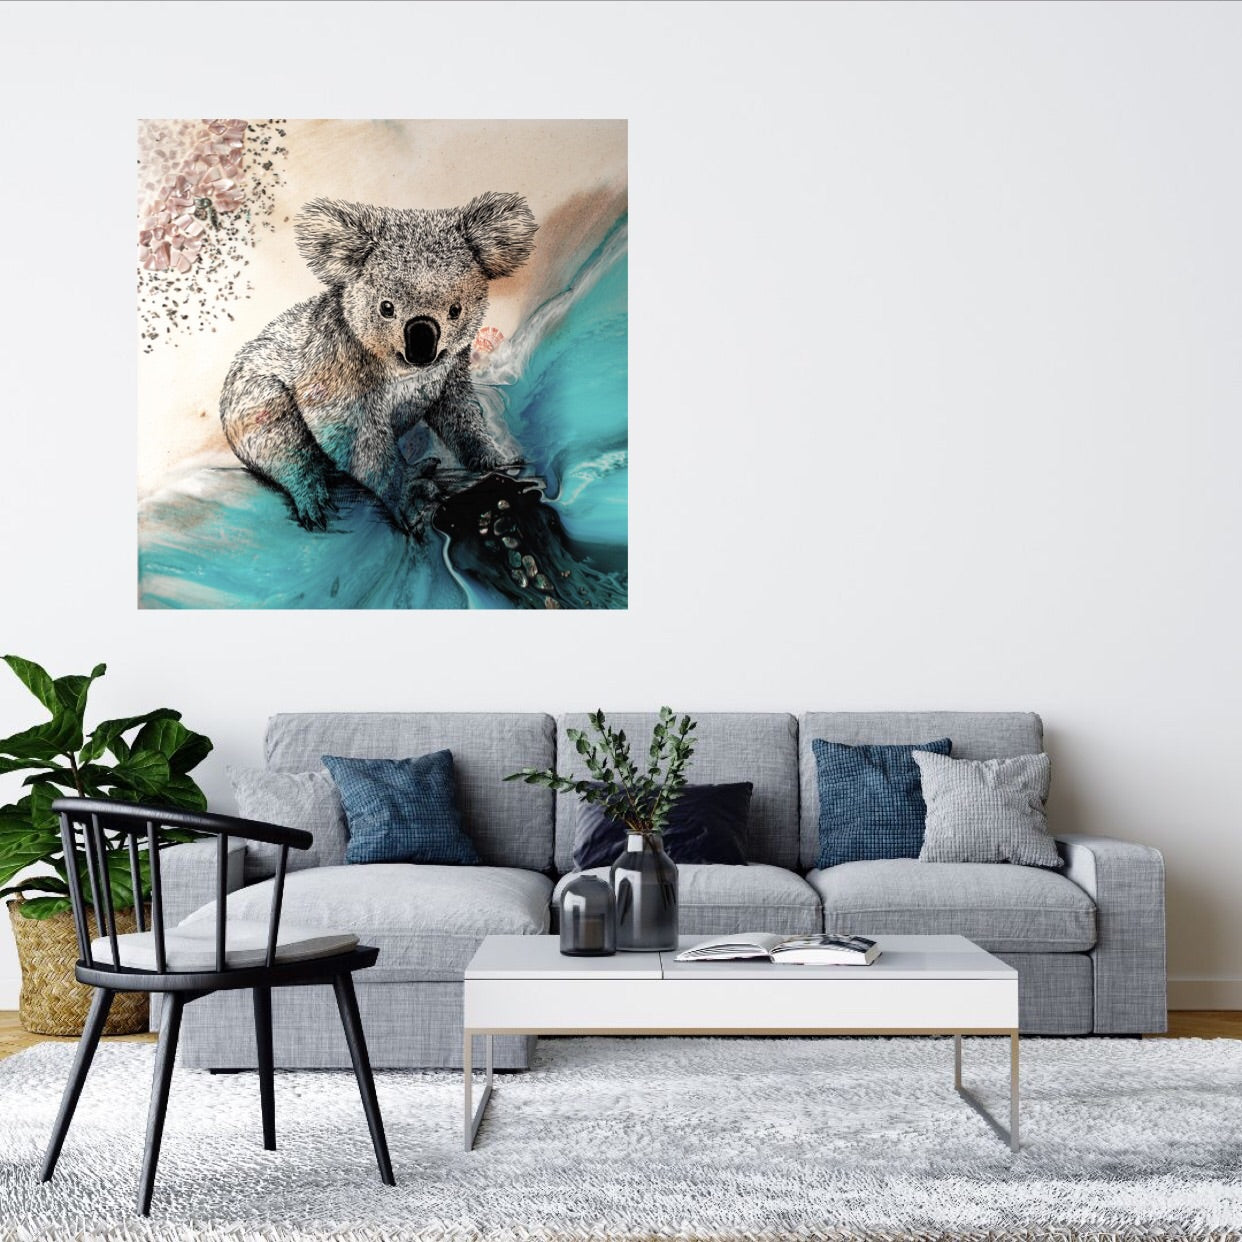 Abstract Ocean. Blue beach with Koala. Art Print. Antuanelle 7 Print for WWF Koala Conservation. Limited Edition